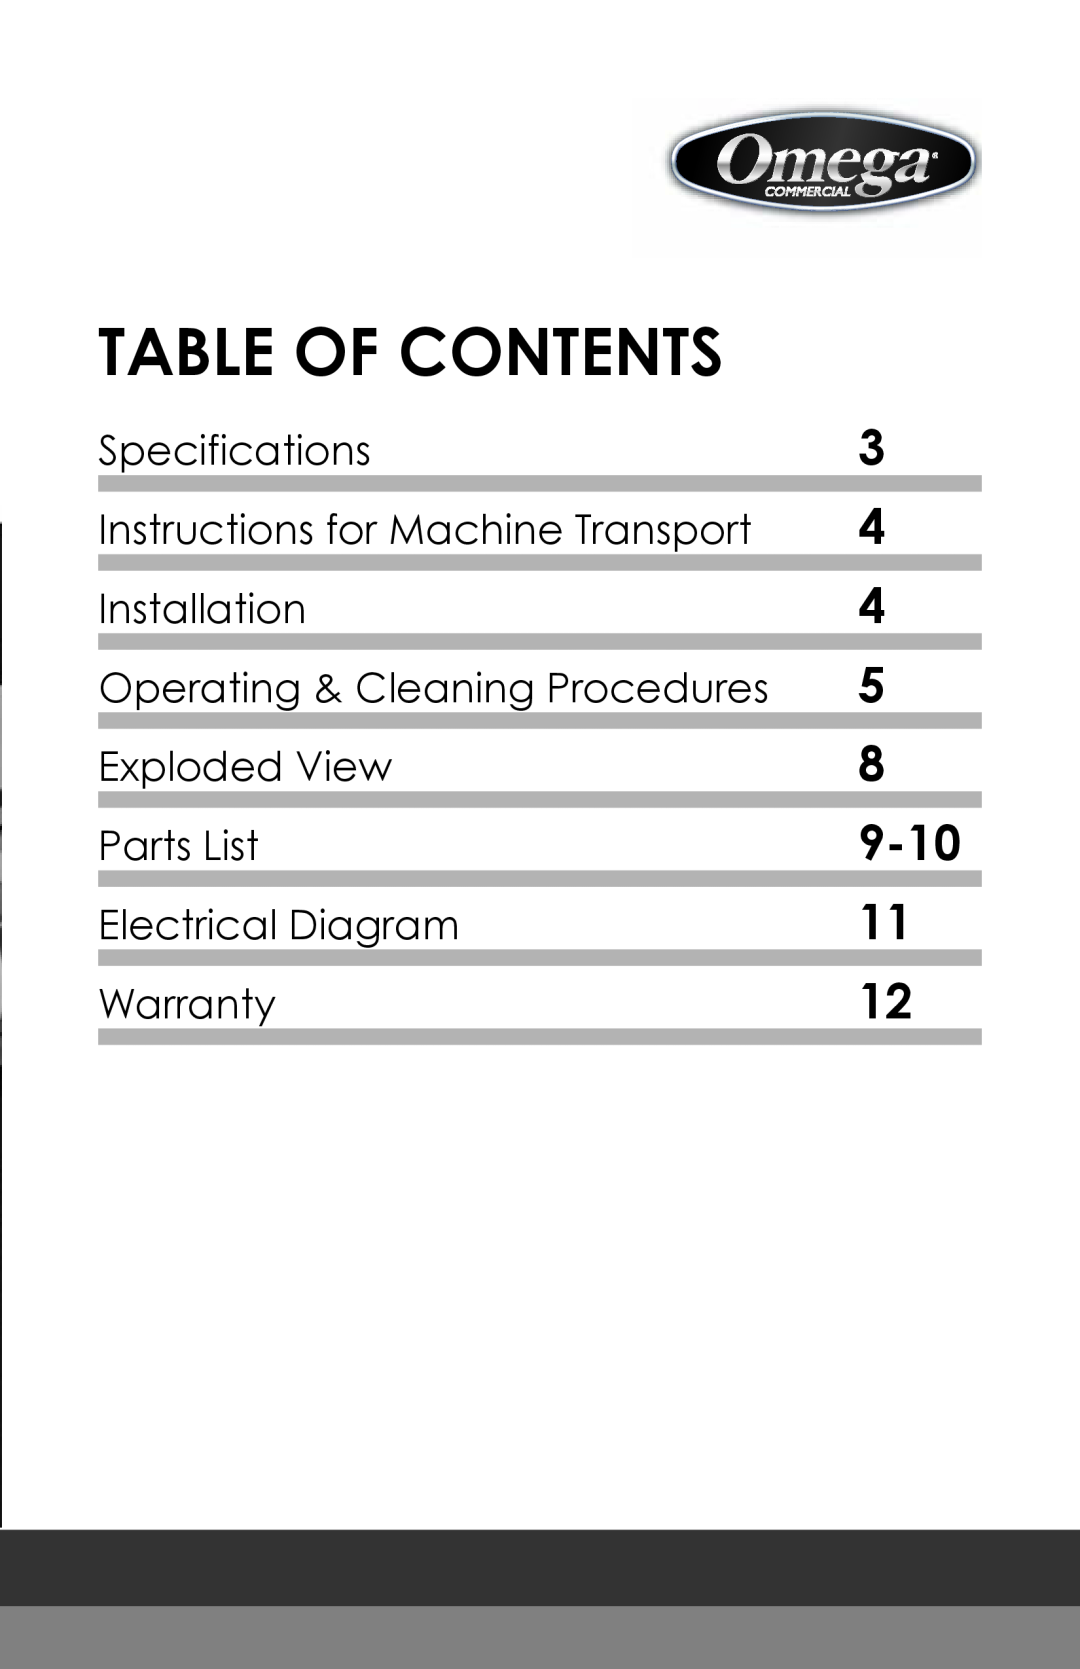 Omega OFS20 Table Of Contents, 9-10, Specifications, Instructions for Machine Transport, Installation, Exploded View 